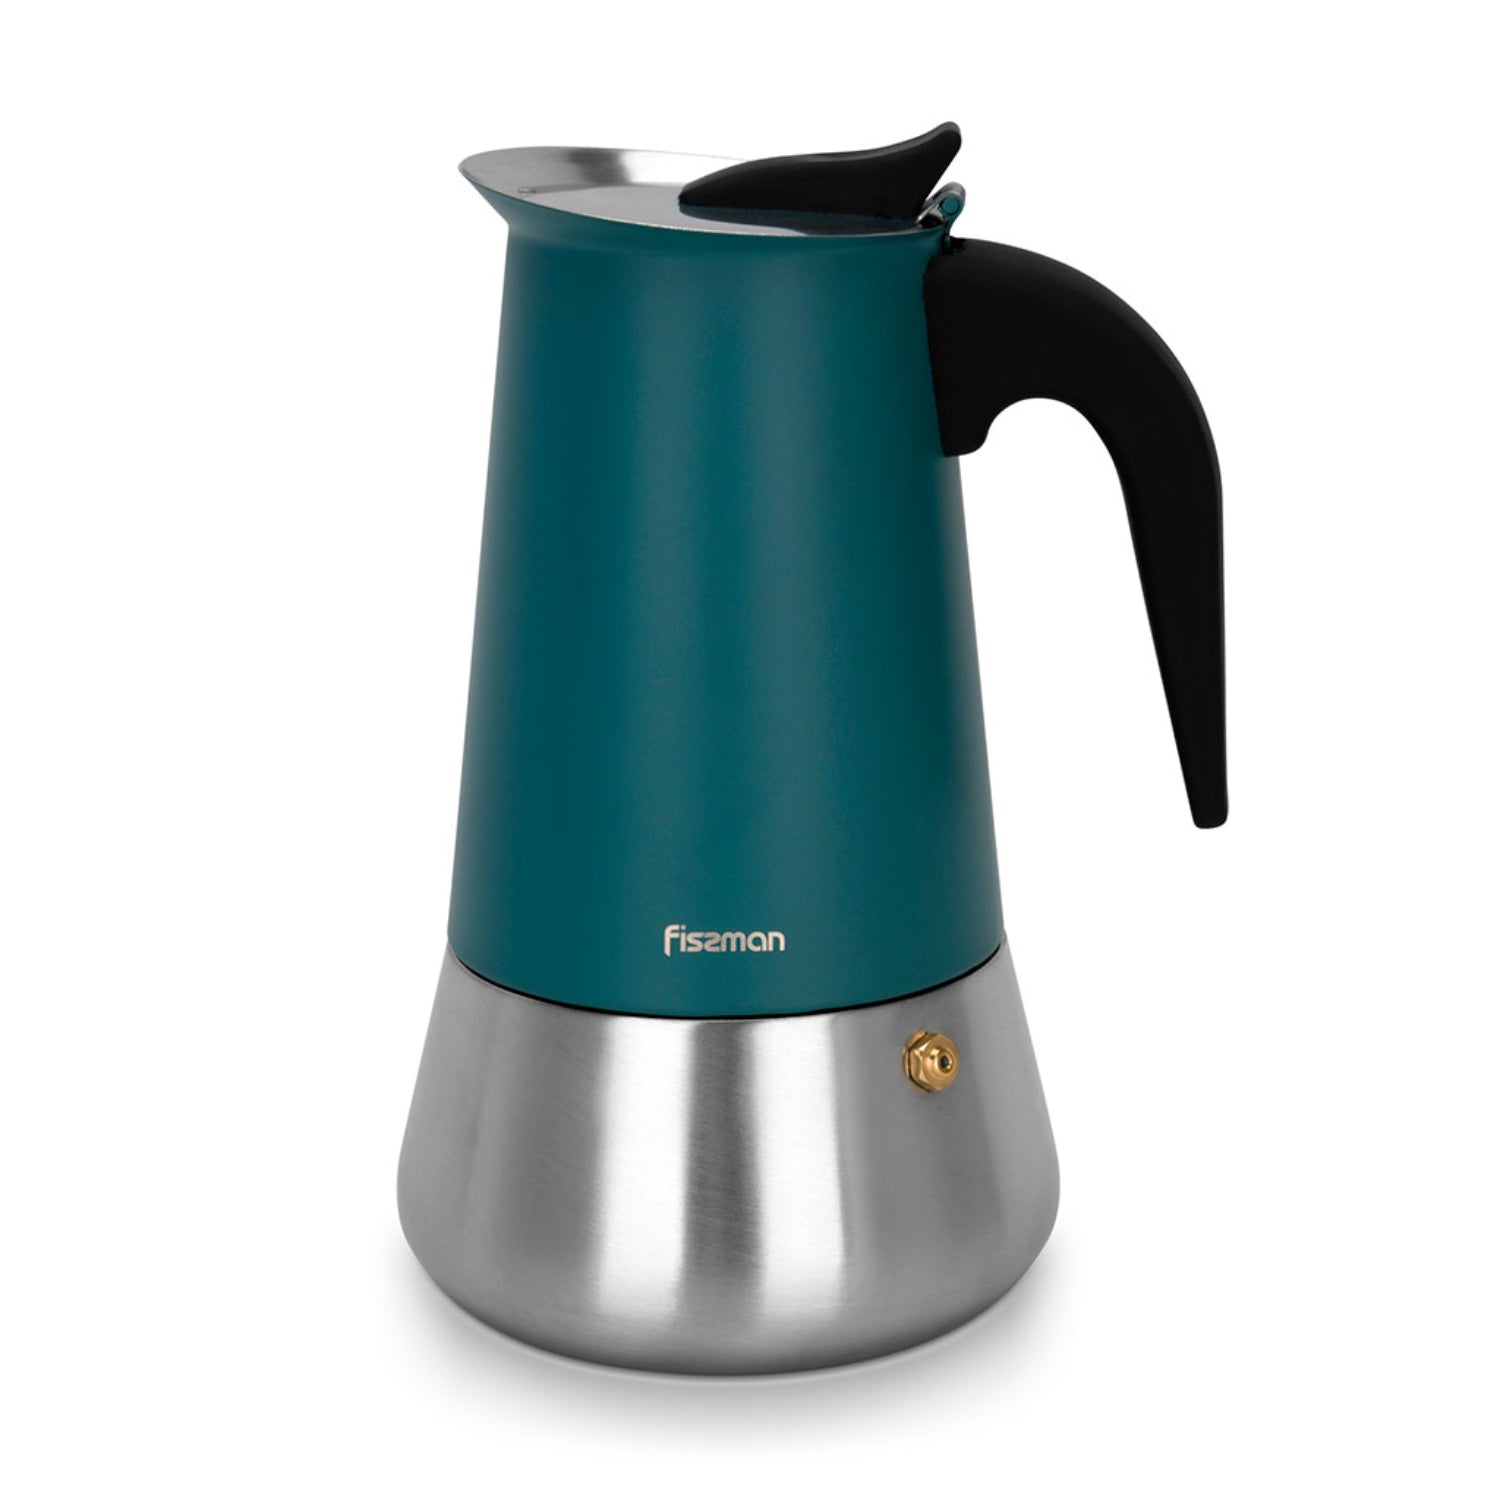 Fissman Stovetop Espresso Maker 450ml For 9 Cups - Stainless Steel